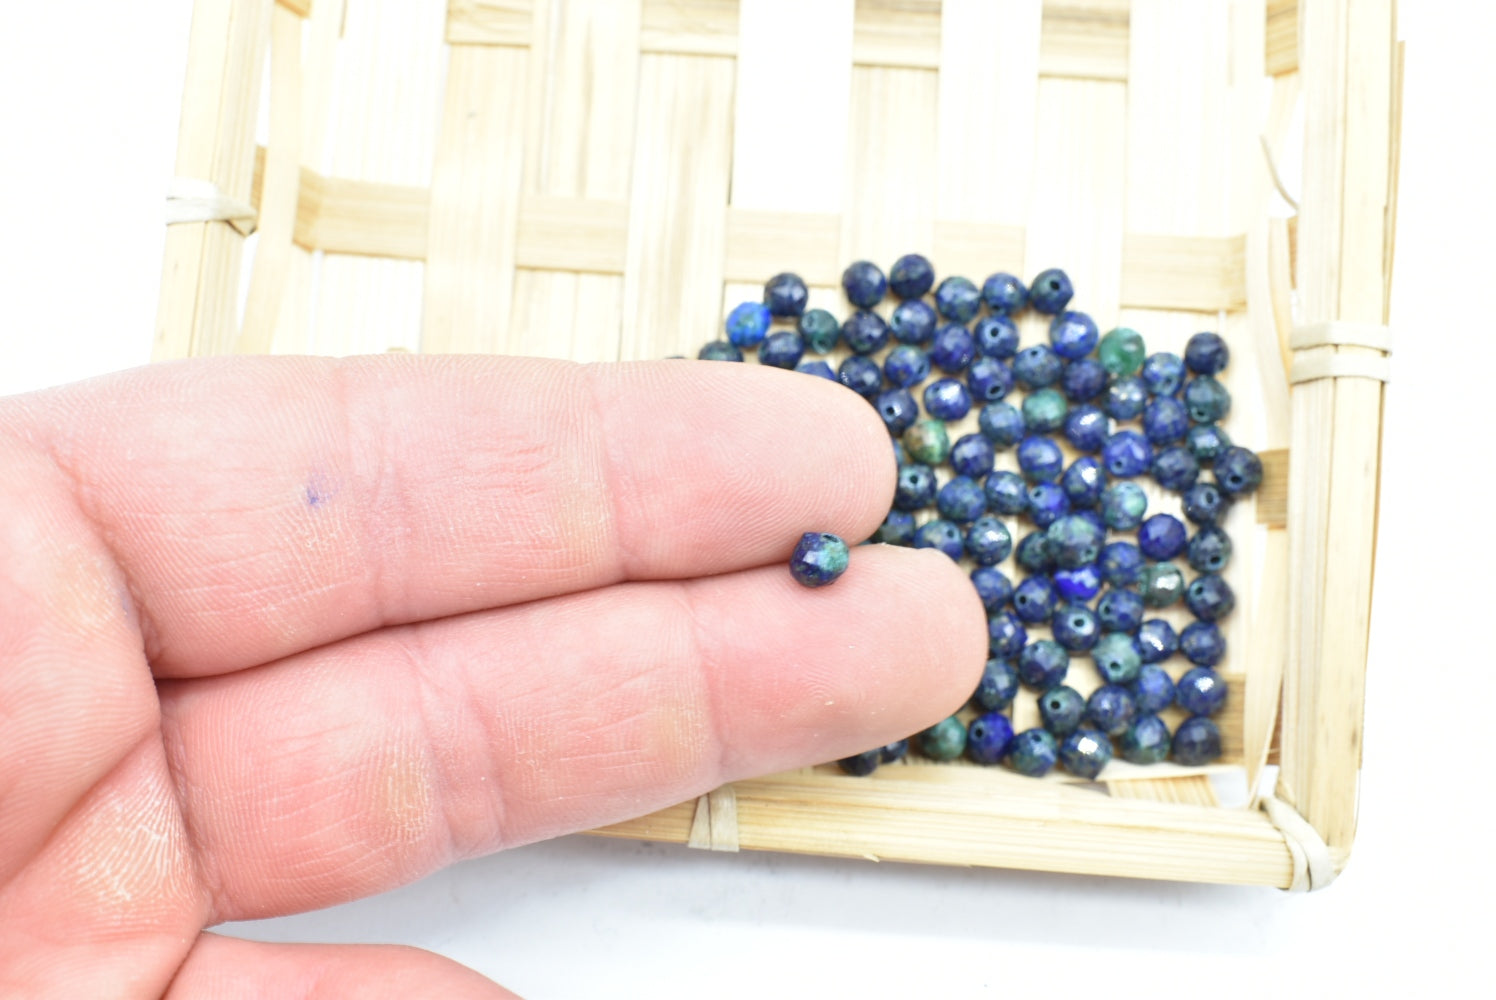 Chrysocolla and Lapis Lazuli Beads 4-5 mm Perforated - 3 Beads